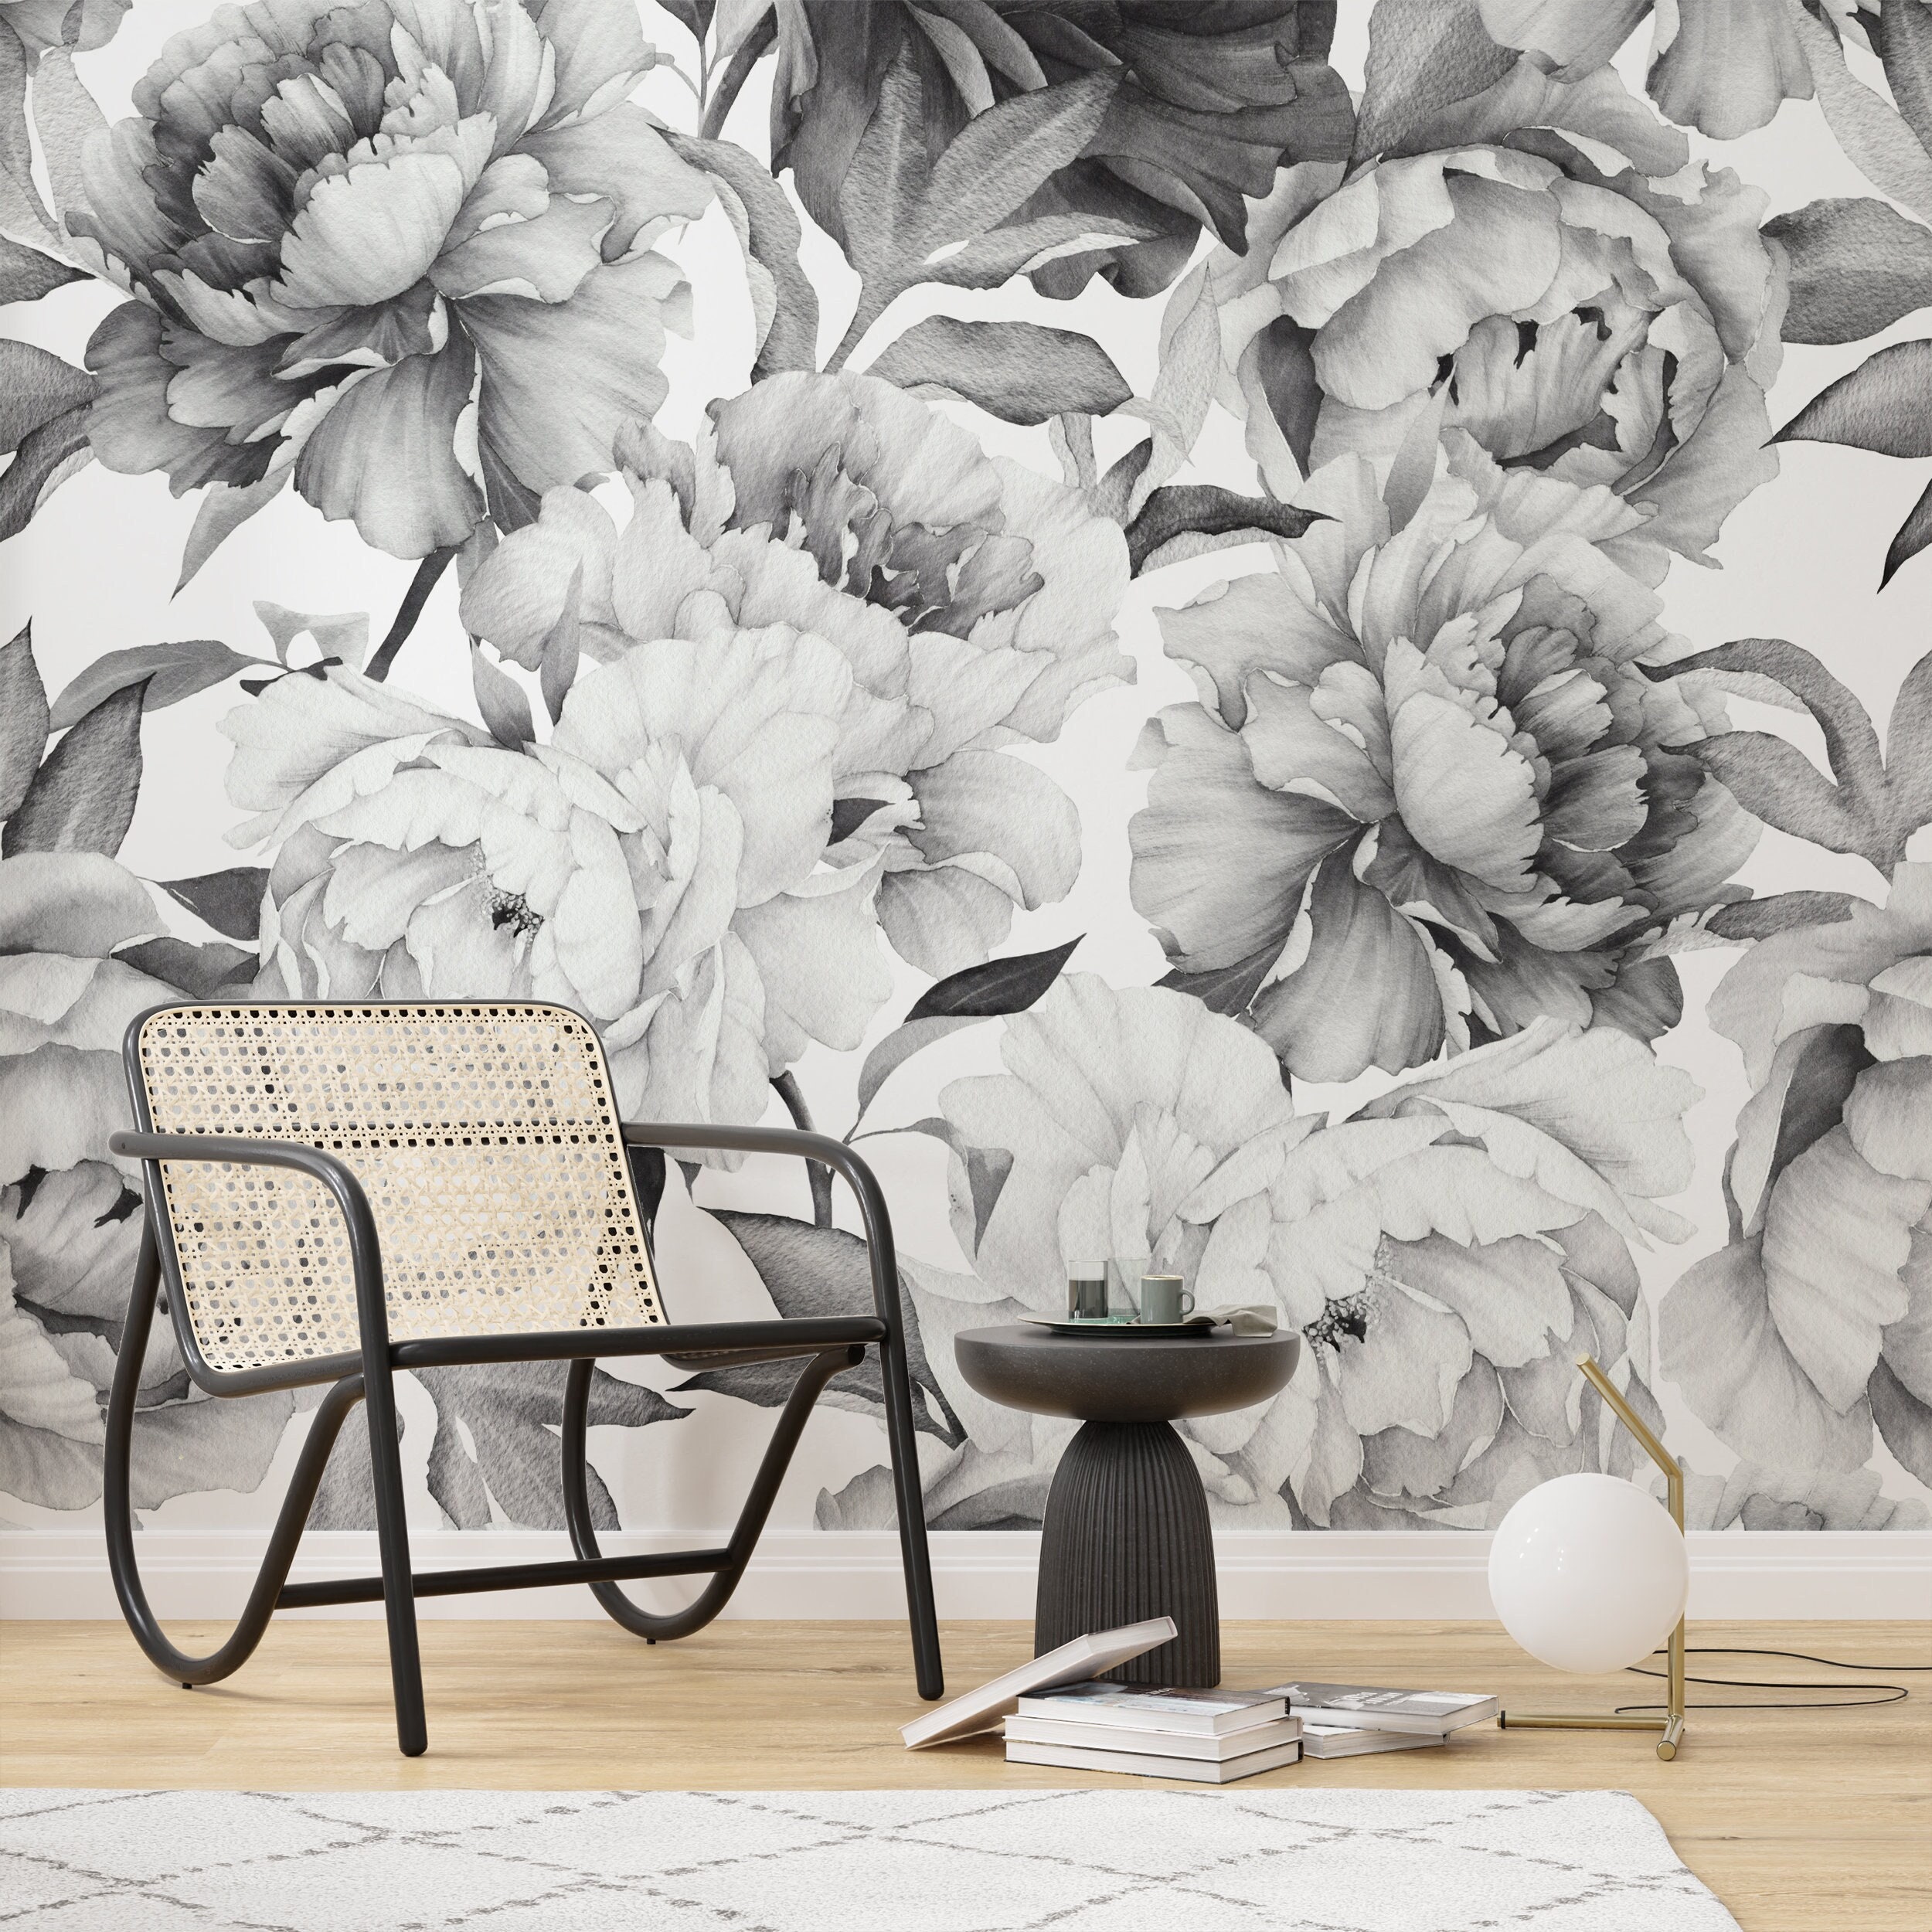 Buy Black and White Peony Wallpaper Removable Non Woven Vlies Online in  India  Etsy